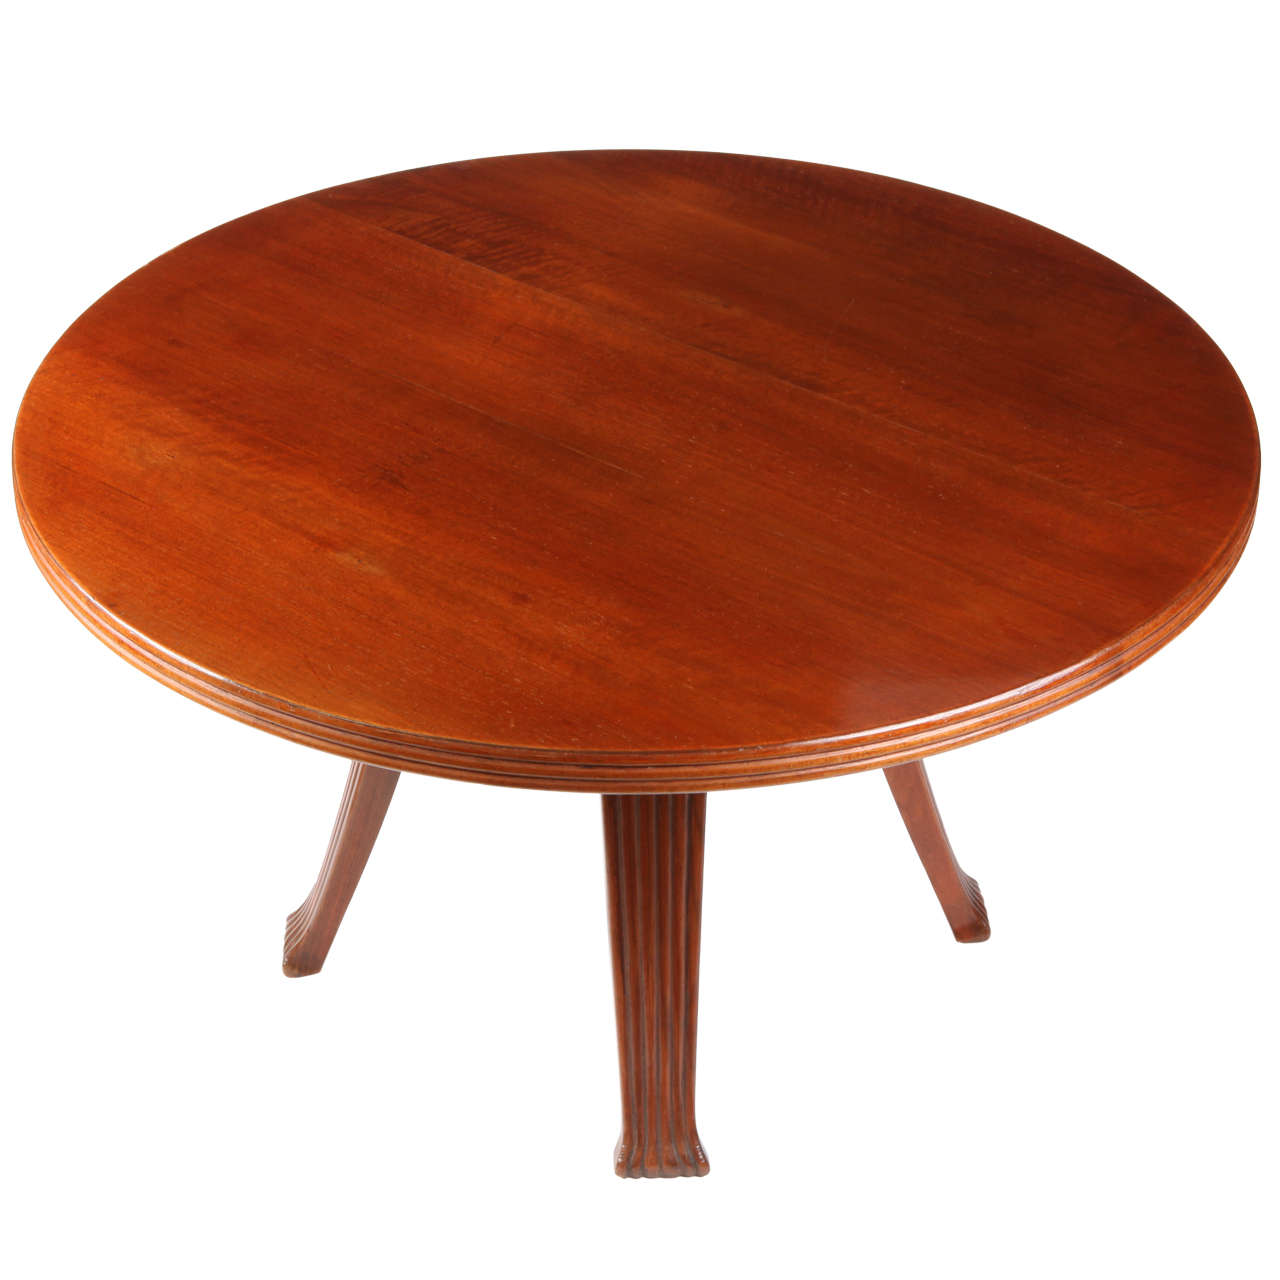 Round Italian walnut coffee table or side table with horizontally grooved edge and vertically grooved and grooved legs carved in solid walnut.
Italy, 1940 Mid-Century Modern.
  